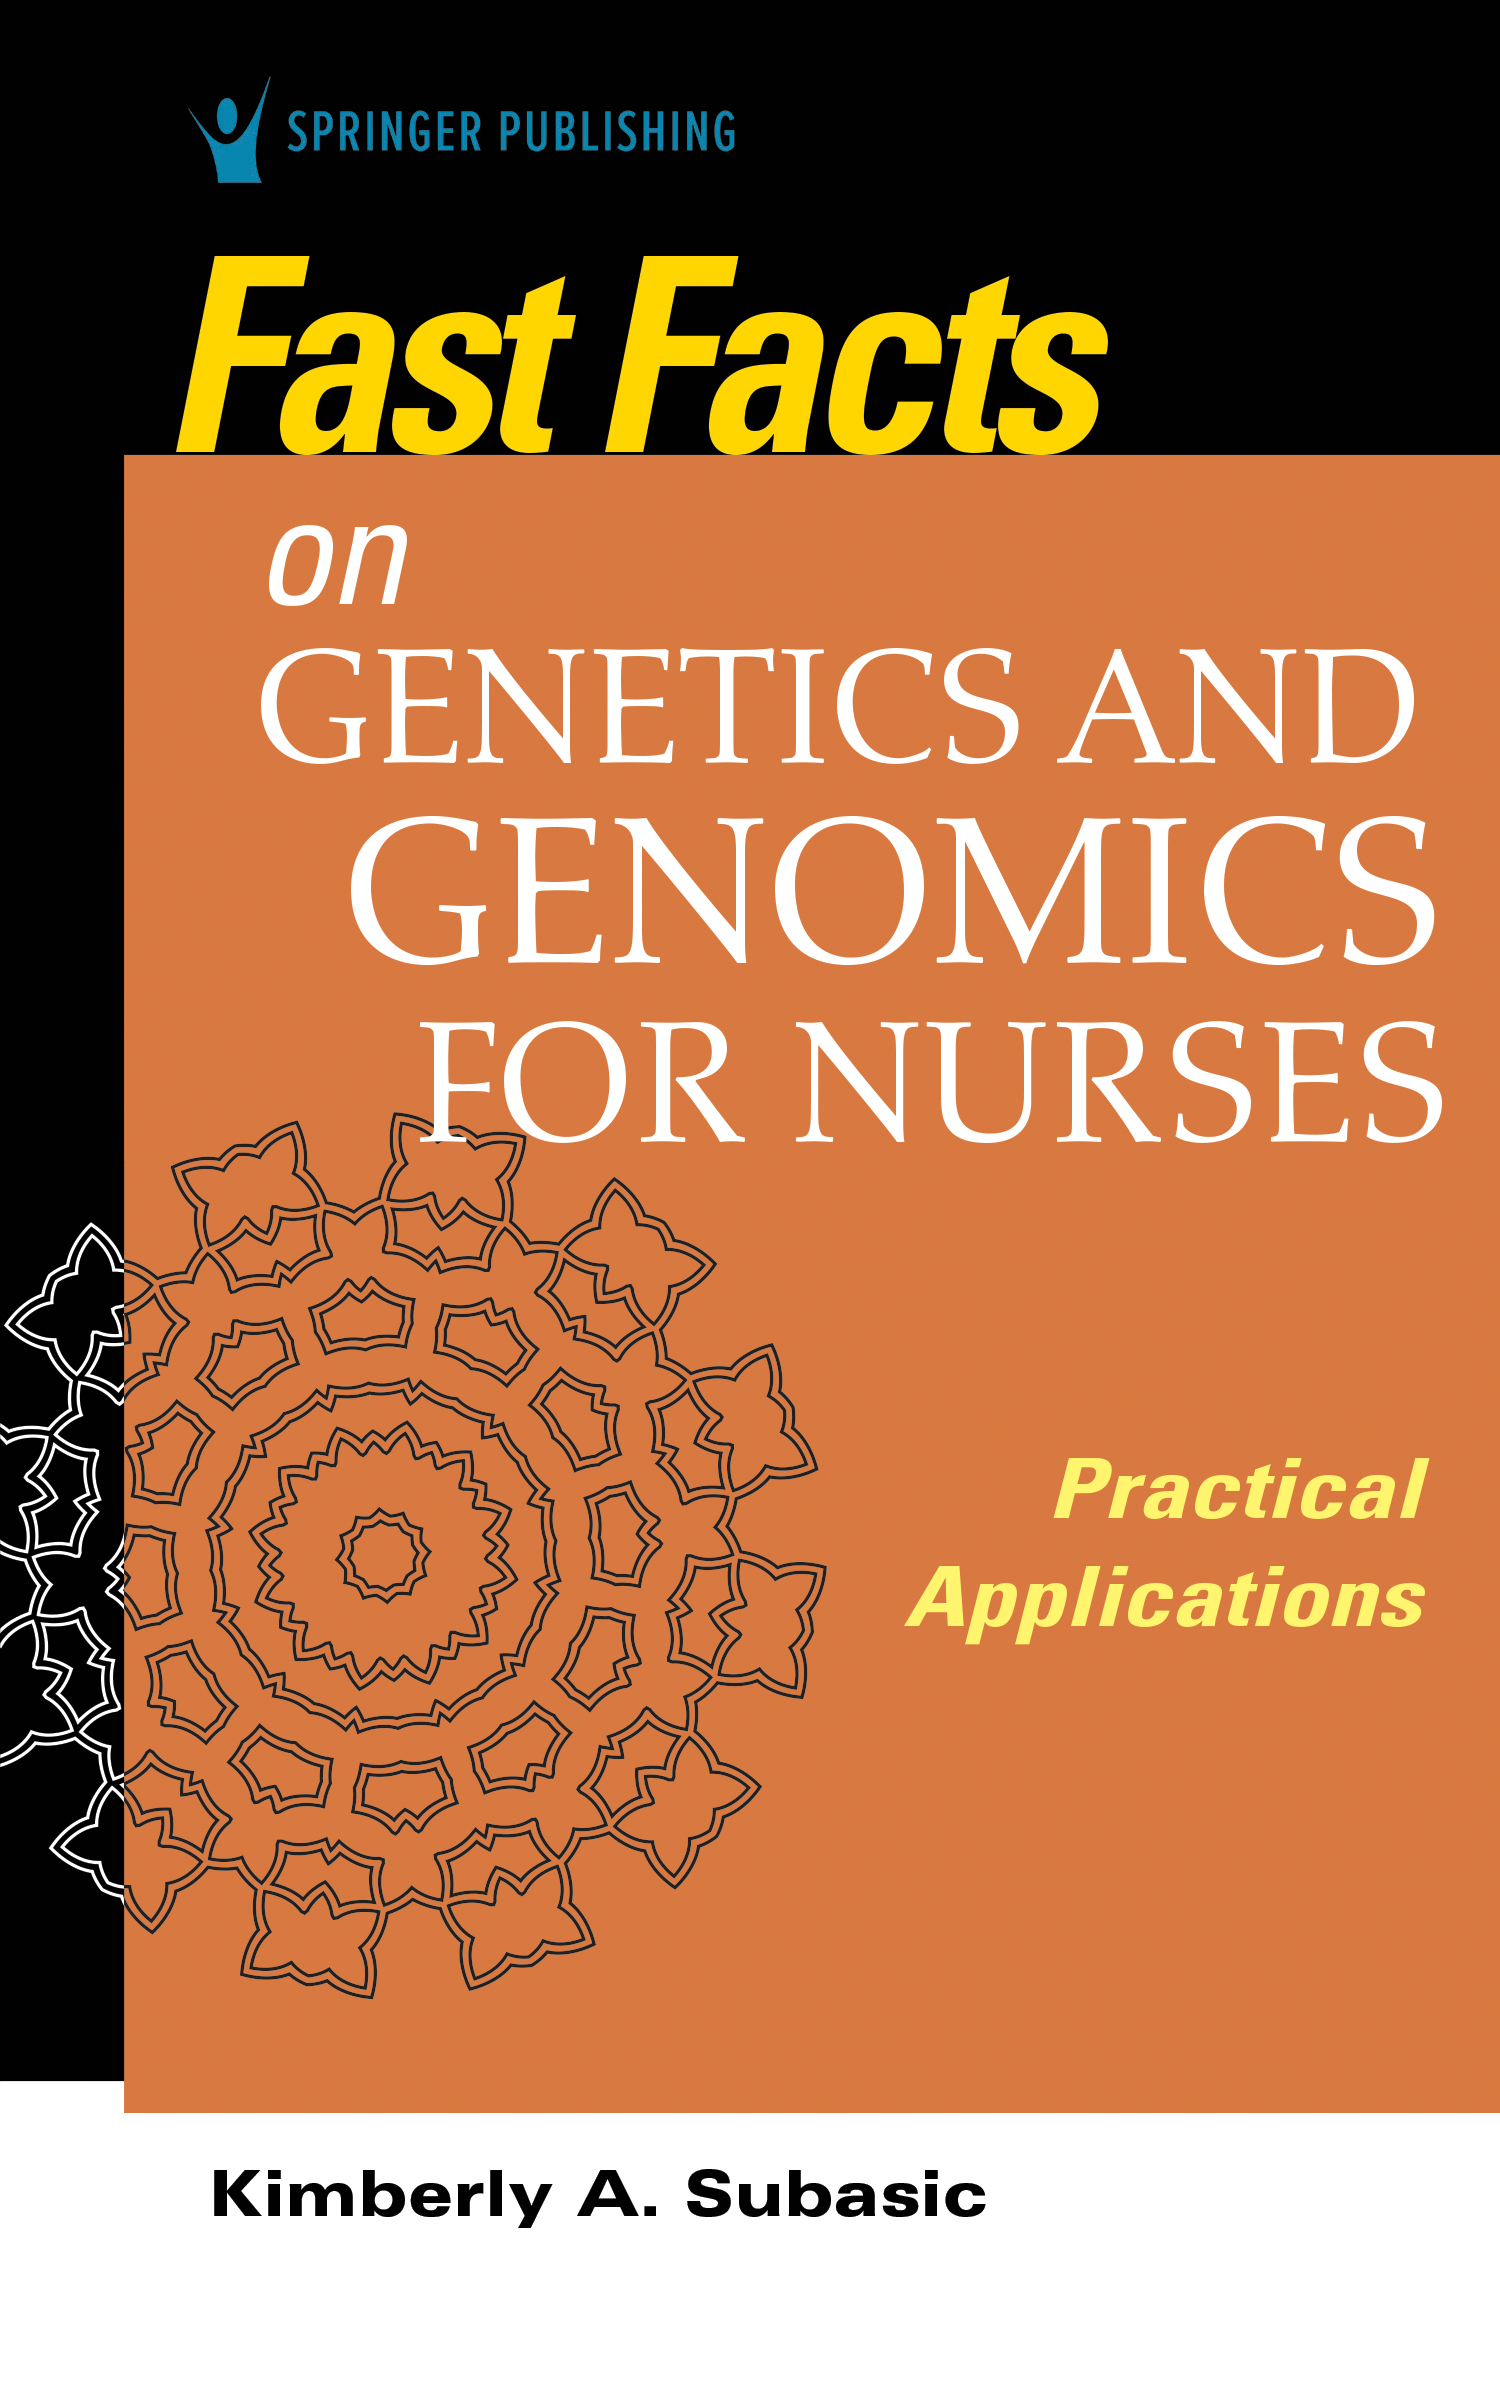 Fast Facts on Genetics and Genomics for Nurses